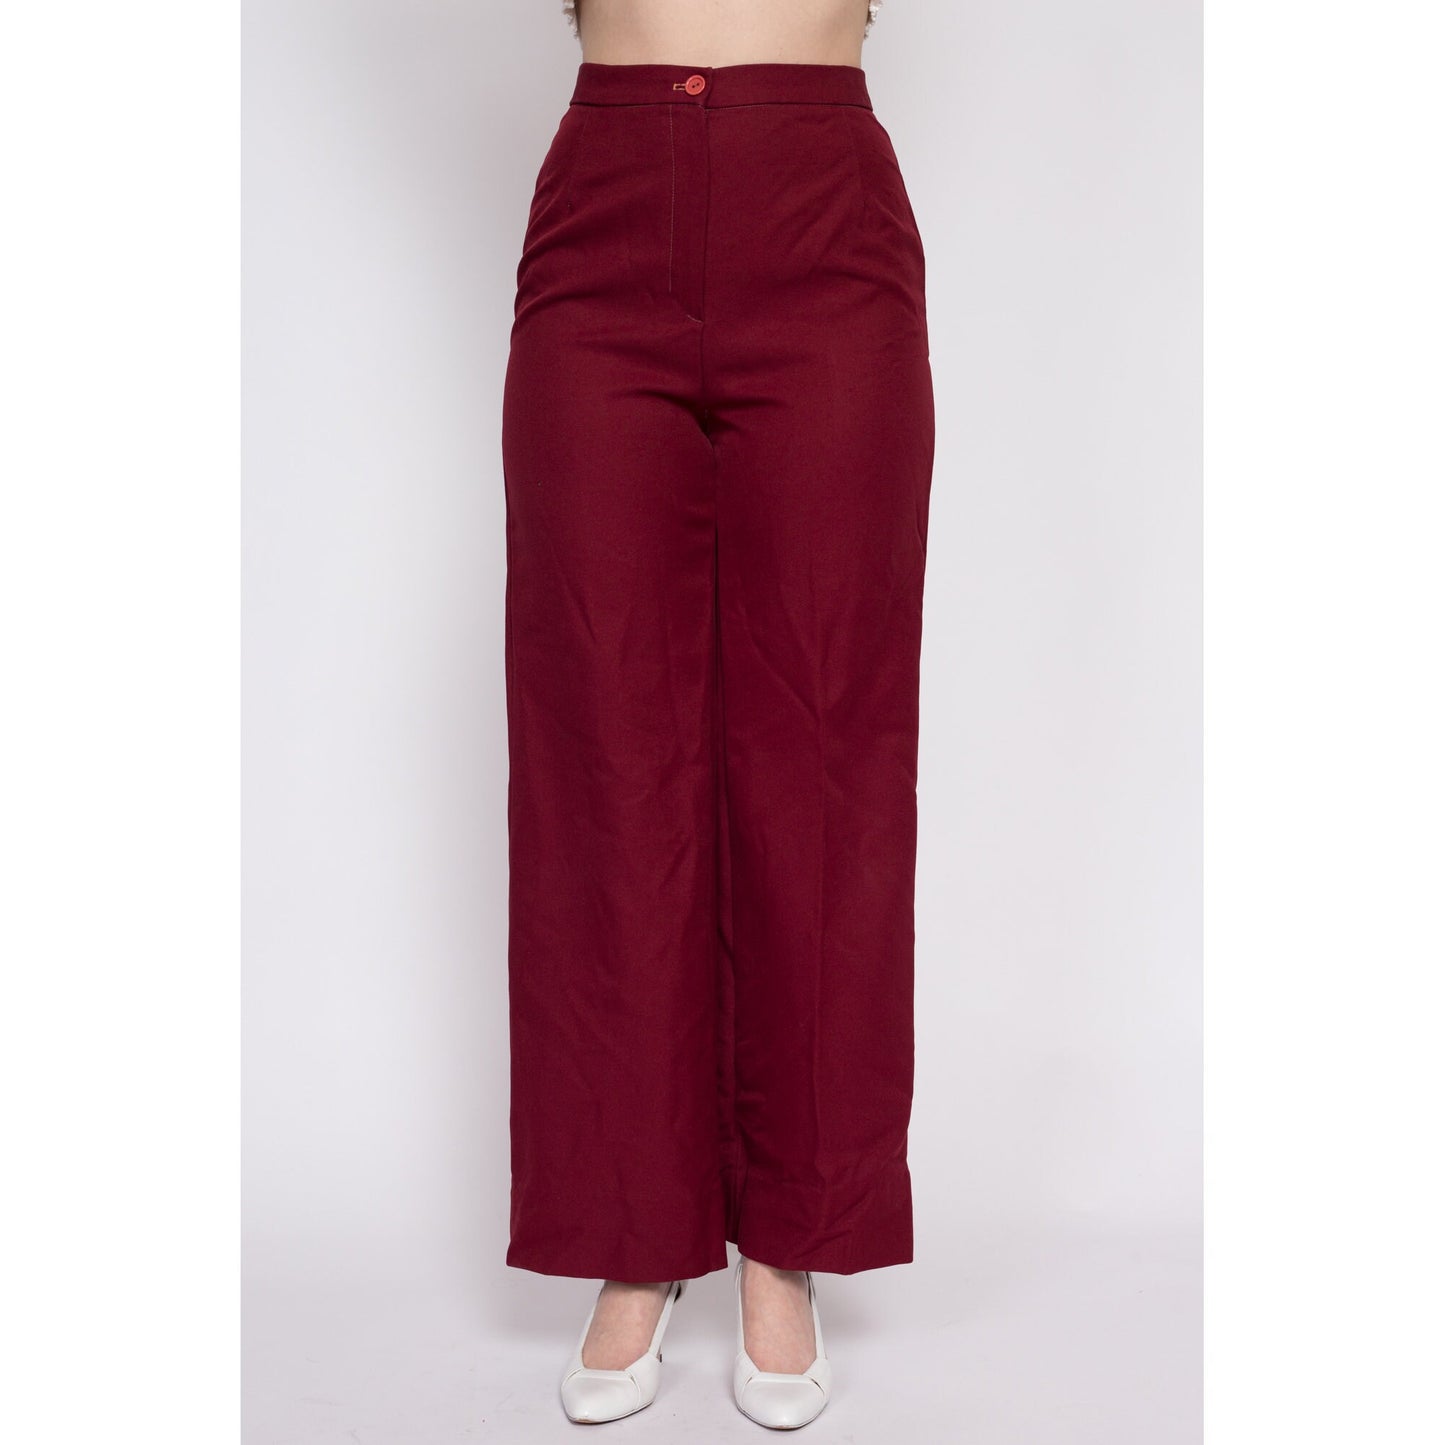 70s Wine Red High Waisted Pants - Medium, 28" | Vintage Straight Leg Retro Polyester Disco Trousers